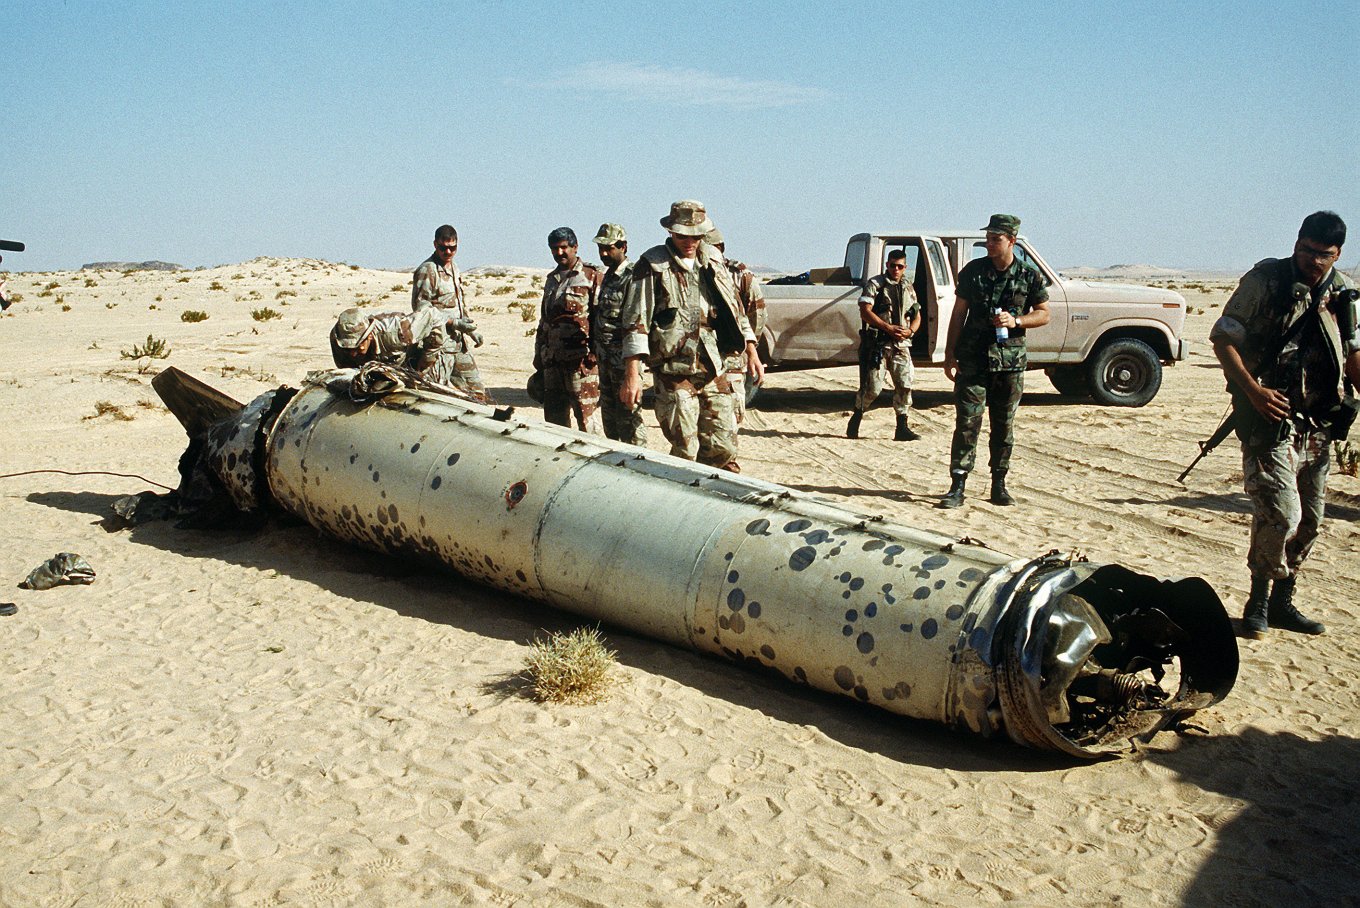 Iraqi Scud missile downed during the Operation Desert Storm, 1991